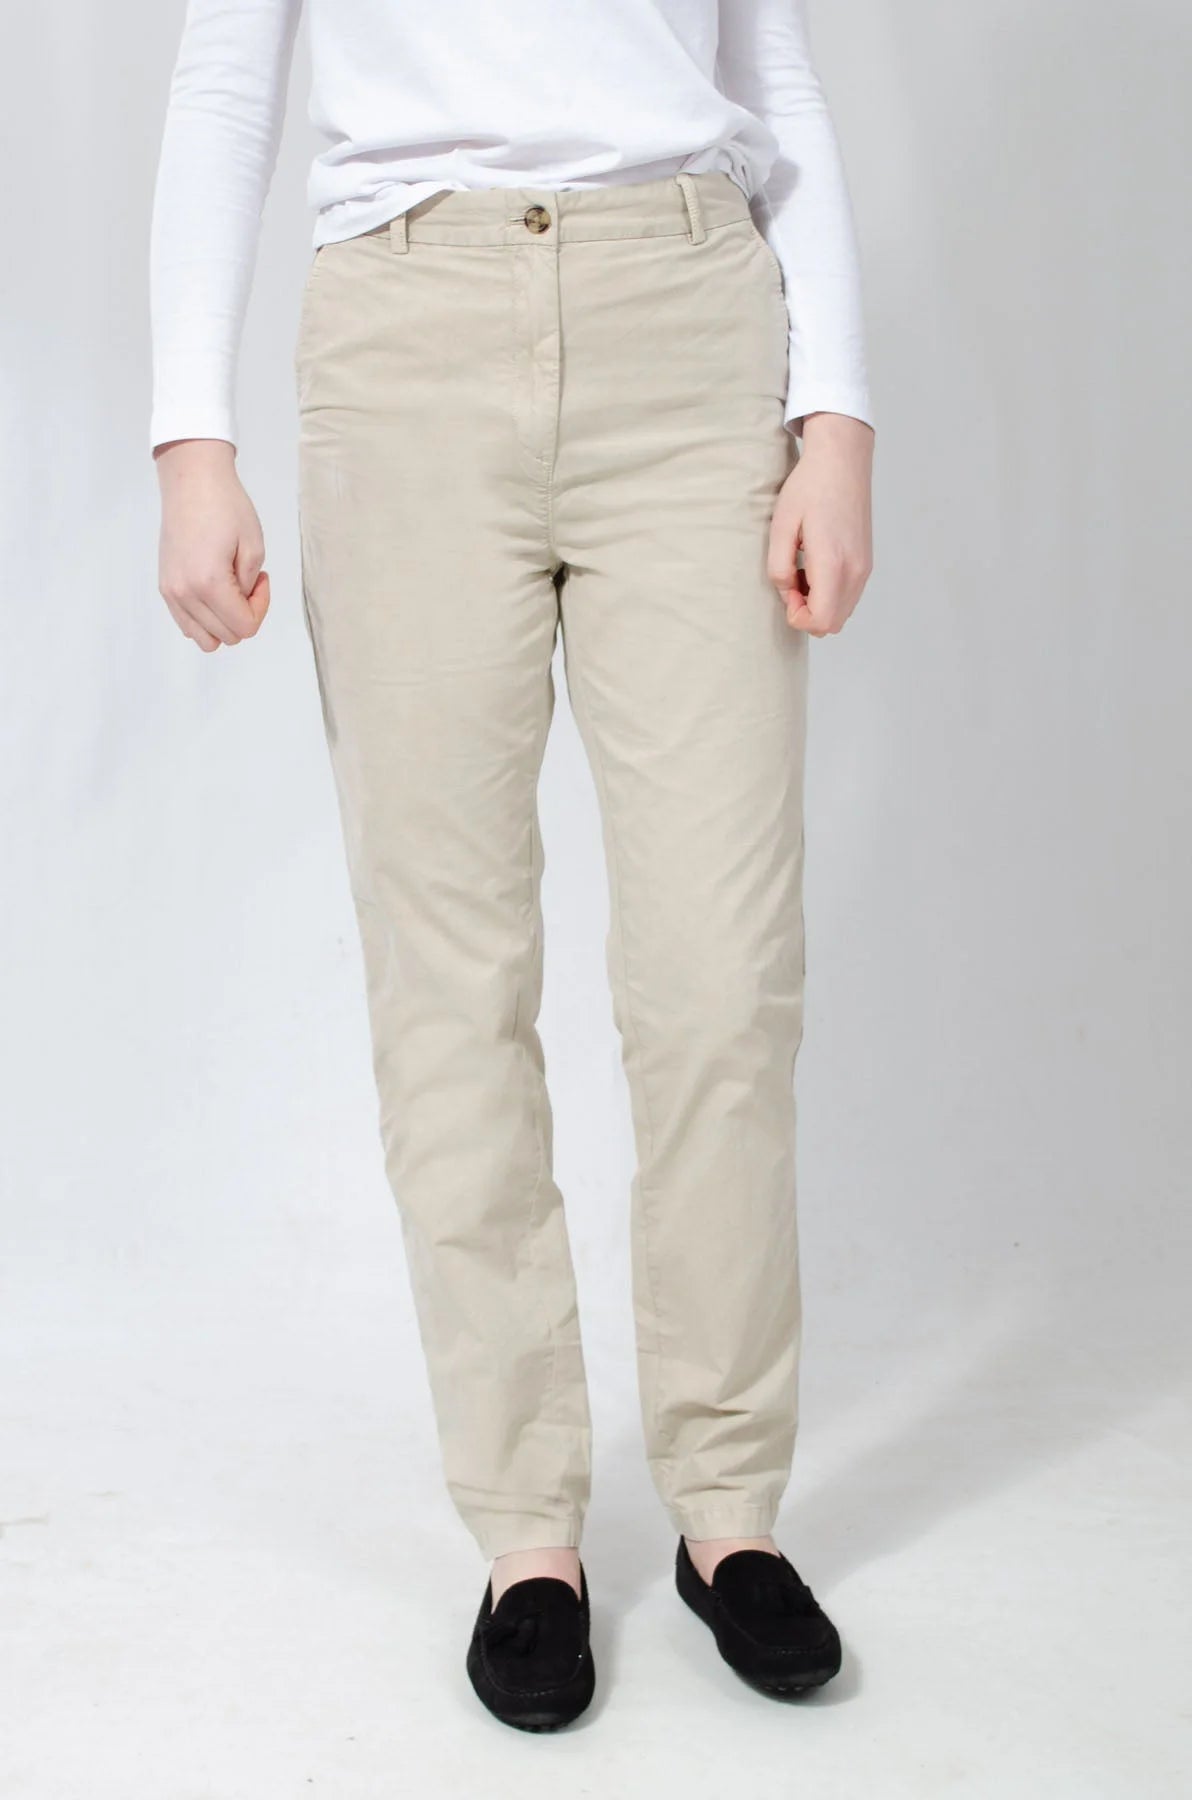 M&S Cotton Casual Chino Trousers Beige / 10 / Reg